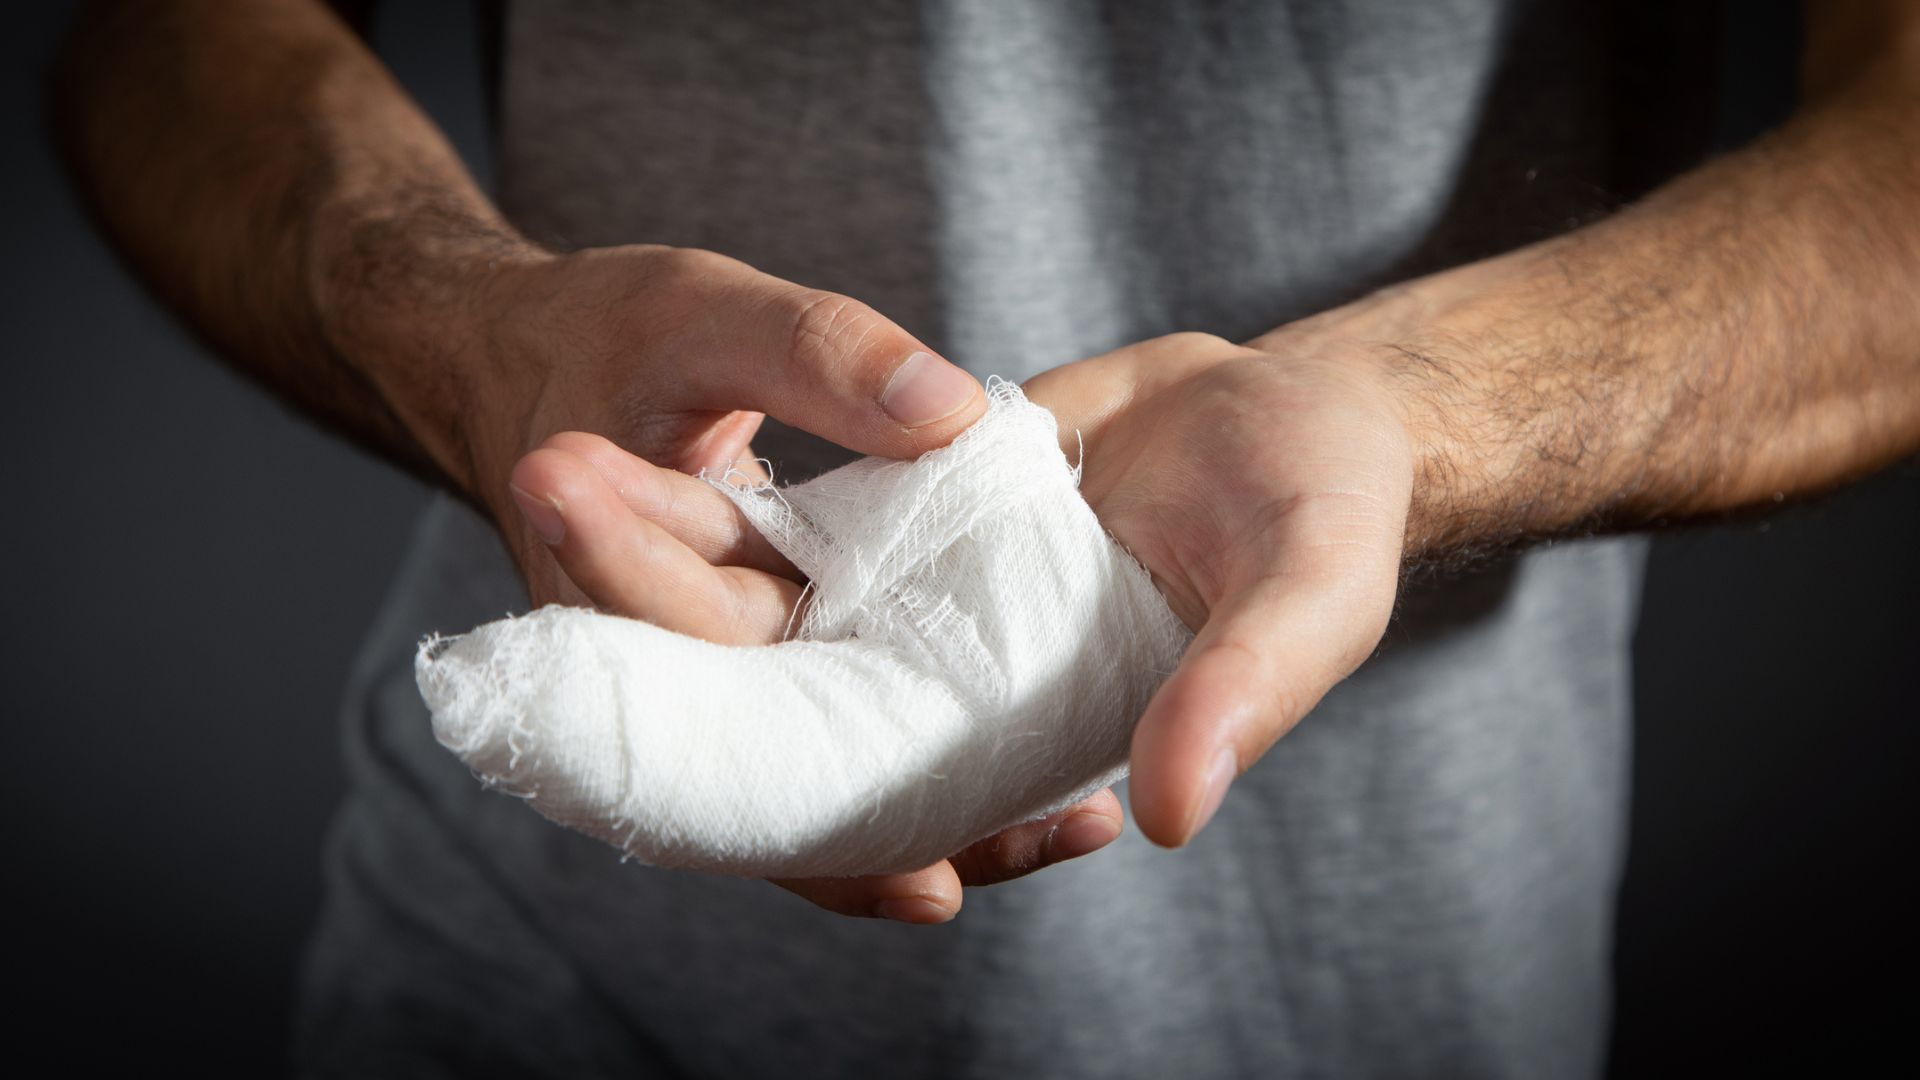 Wound care manufacturer controversy calls attention to shady dealings 